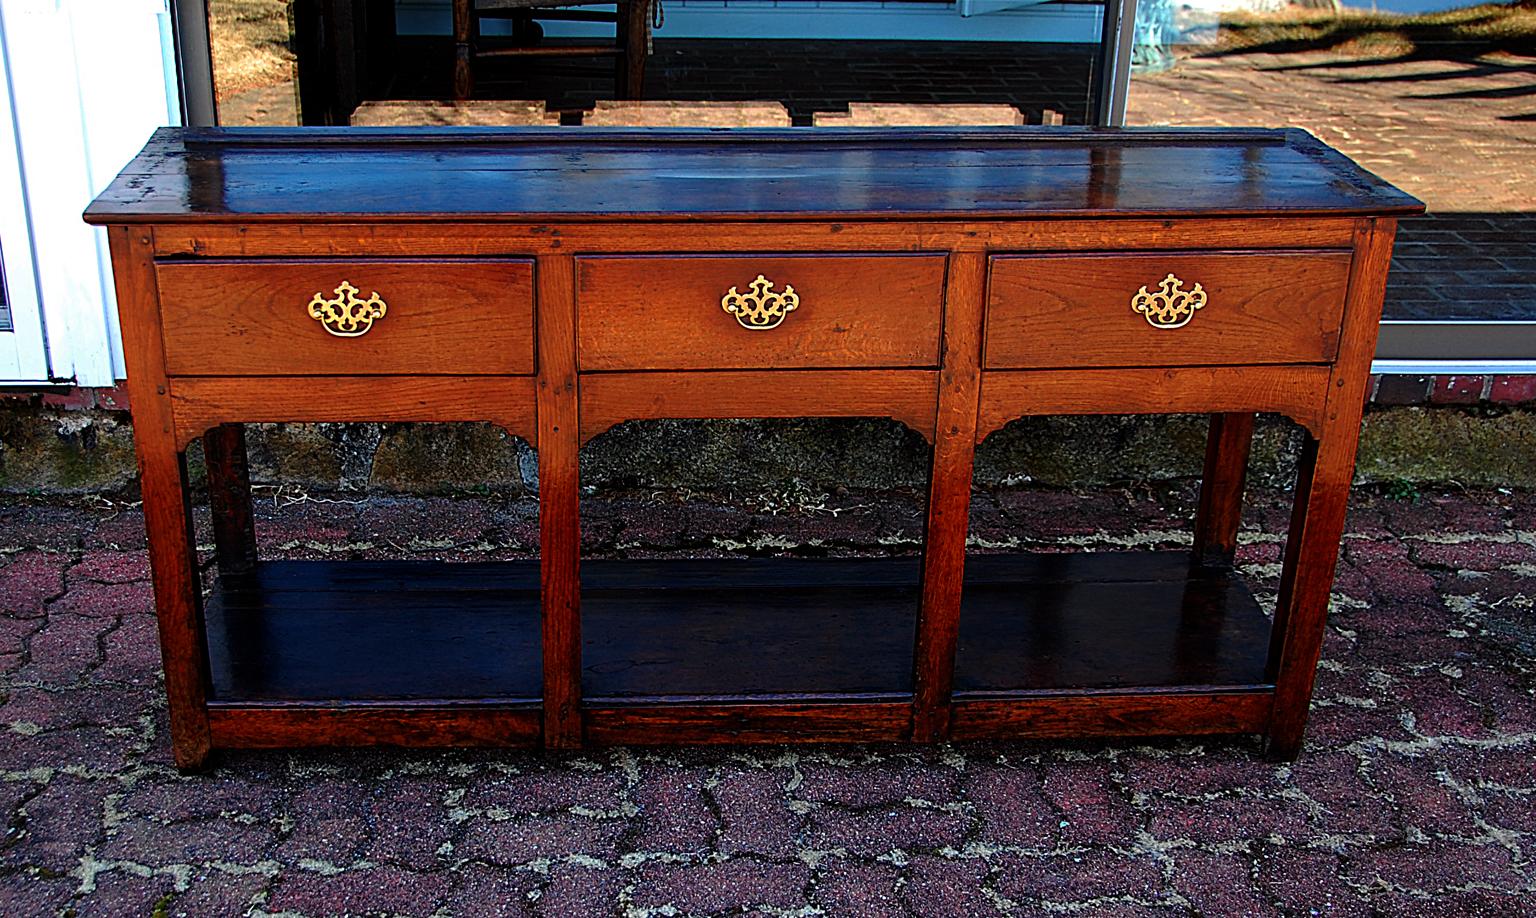 Welsh 18th century oak three drawer potboard low dresser with lower shelf for pots. This dresser comes from southern Wales, most probably made in Carmarthenshire. This form is a classic small dresser (61 3/4